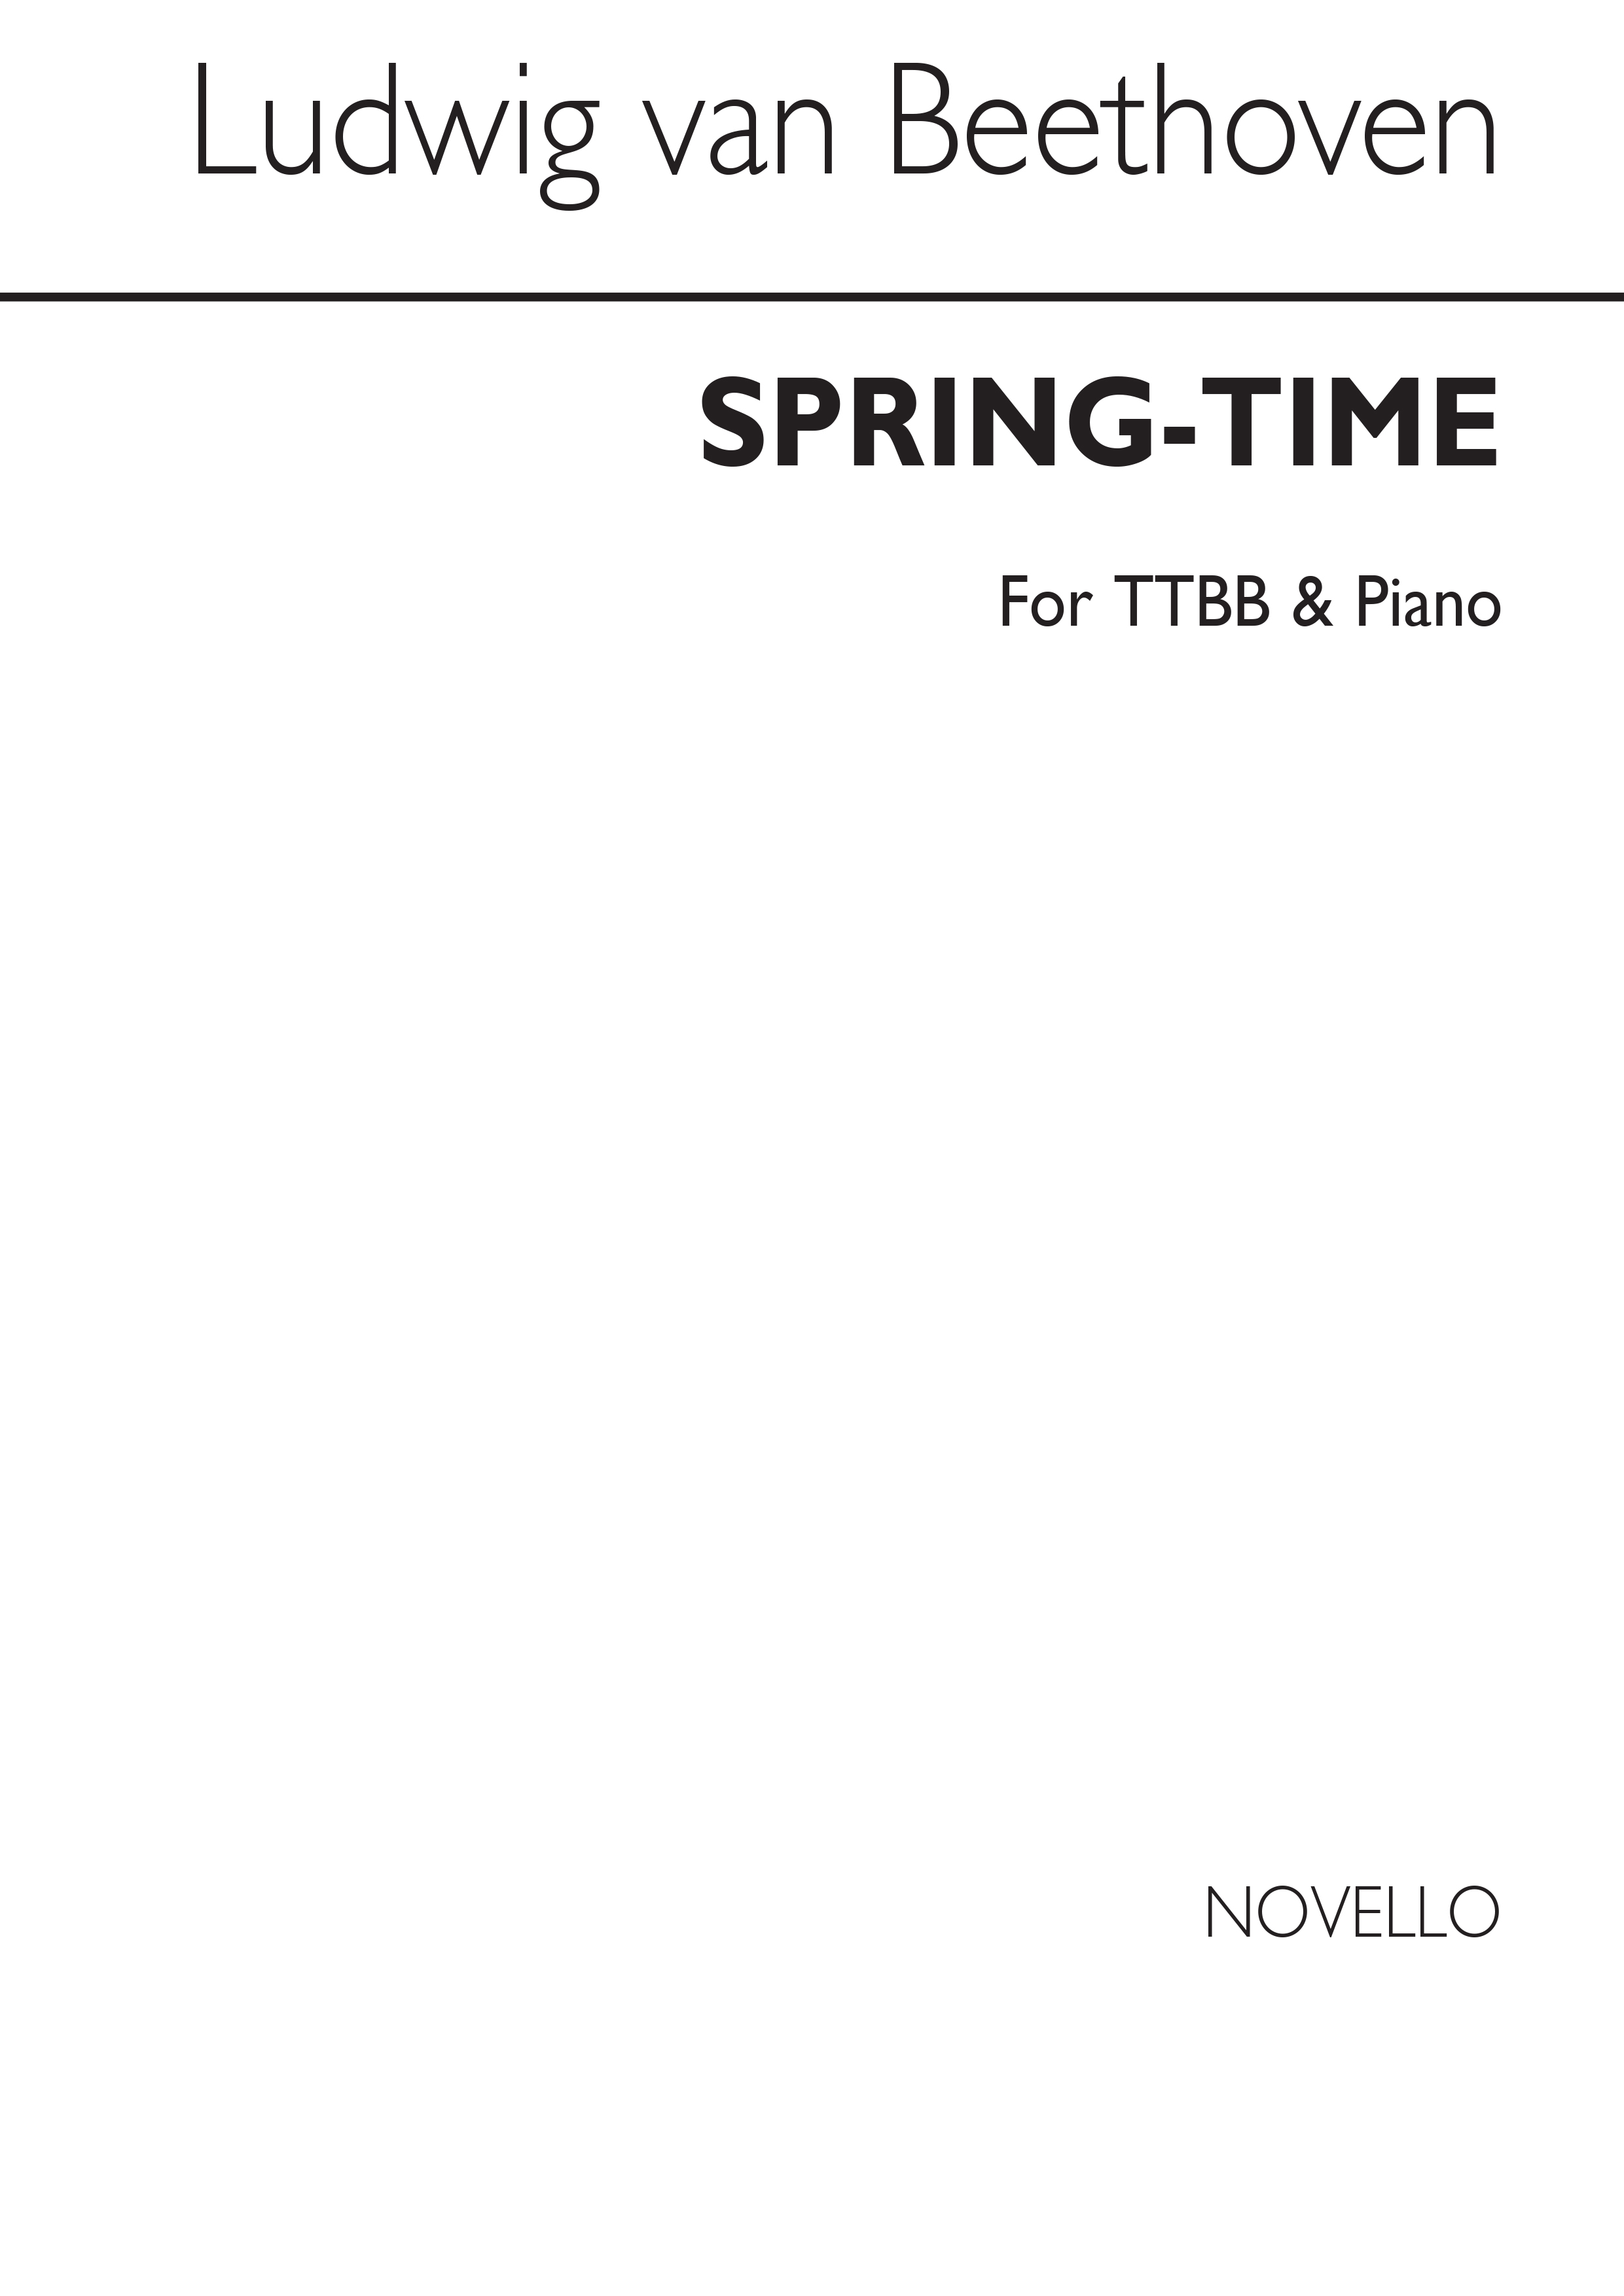 Ludwig van Beethoven: Spring-time: Men's Voices: Vocal Score